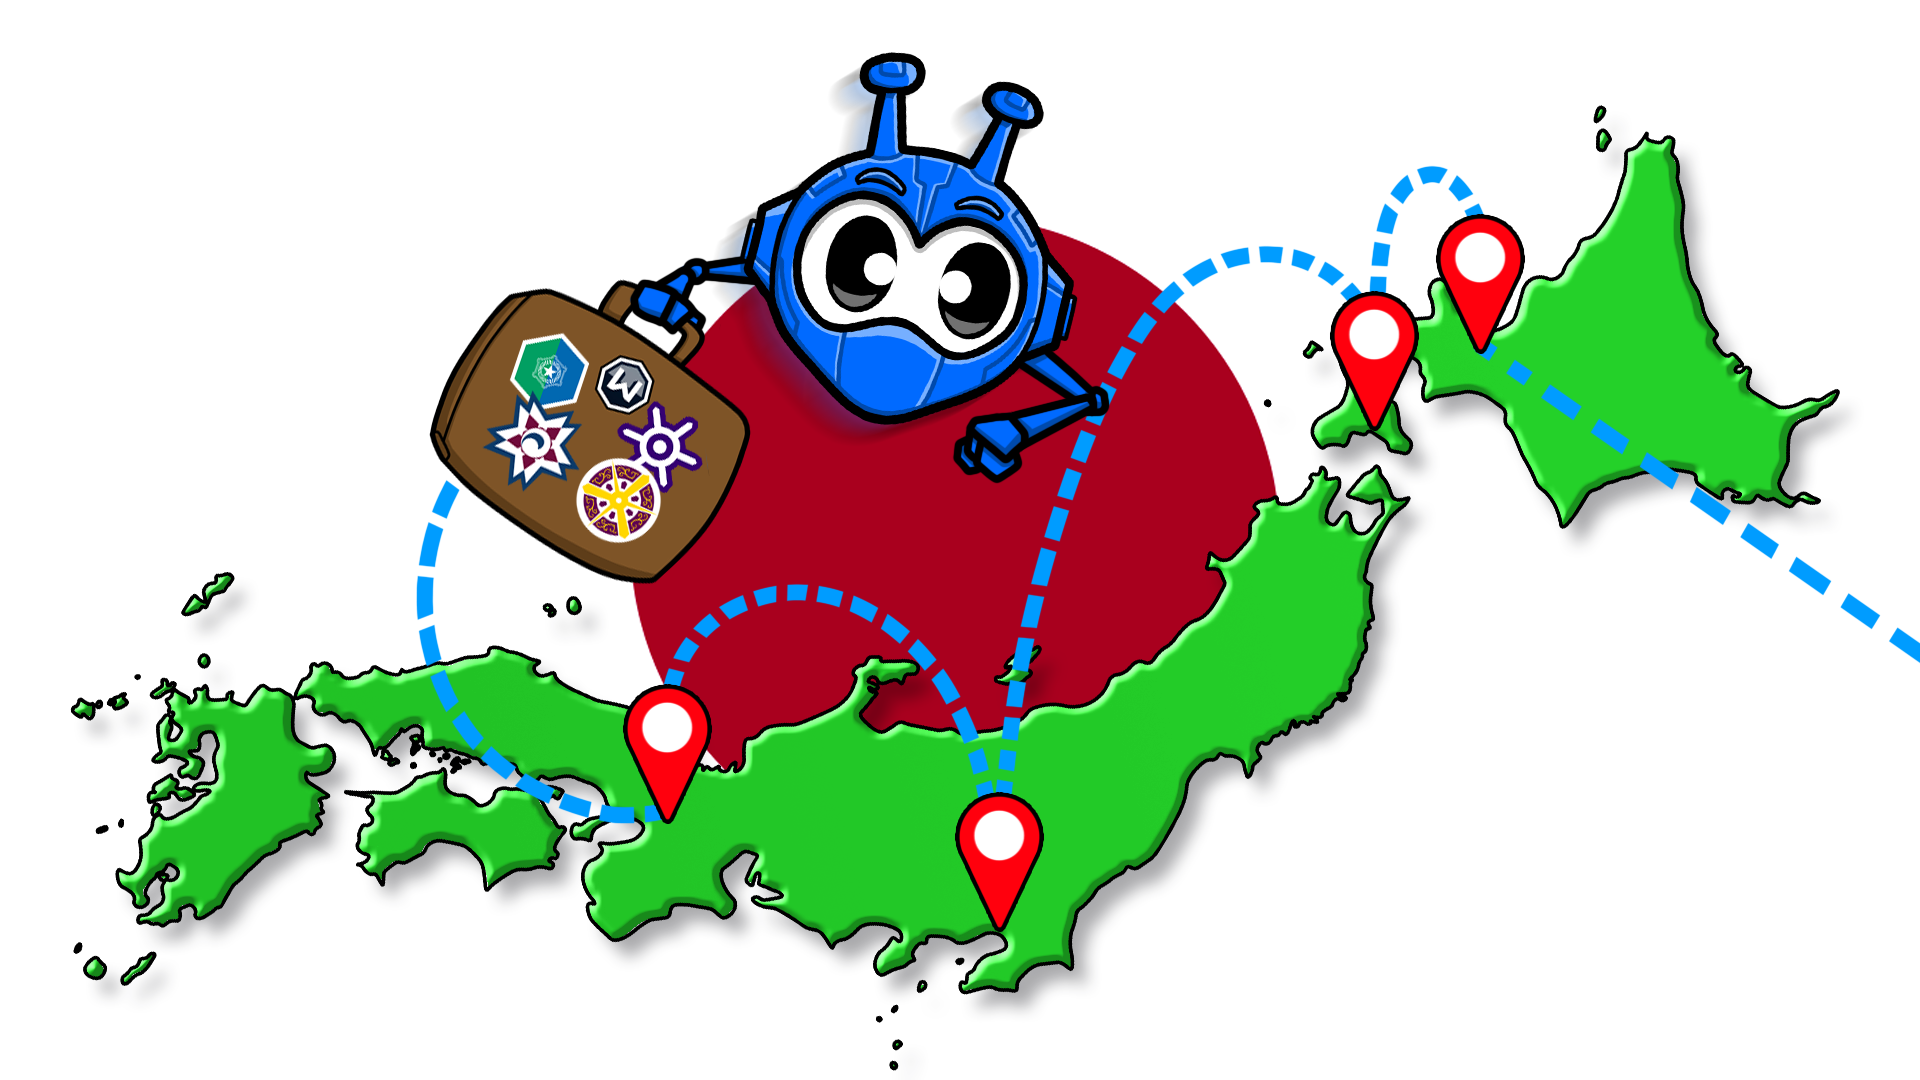 Cartoon image of Windscribe mascot Garry travelling across Japan with a suitcase in hand